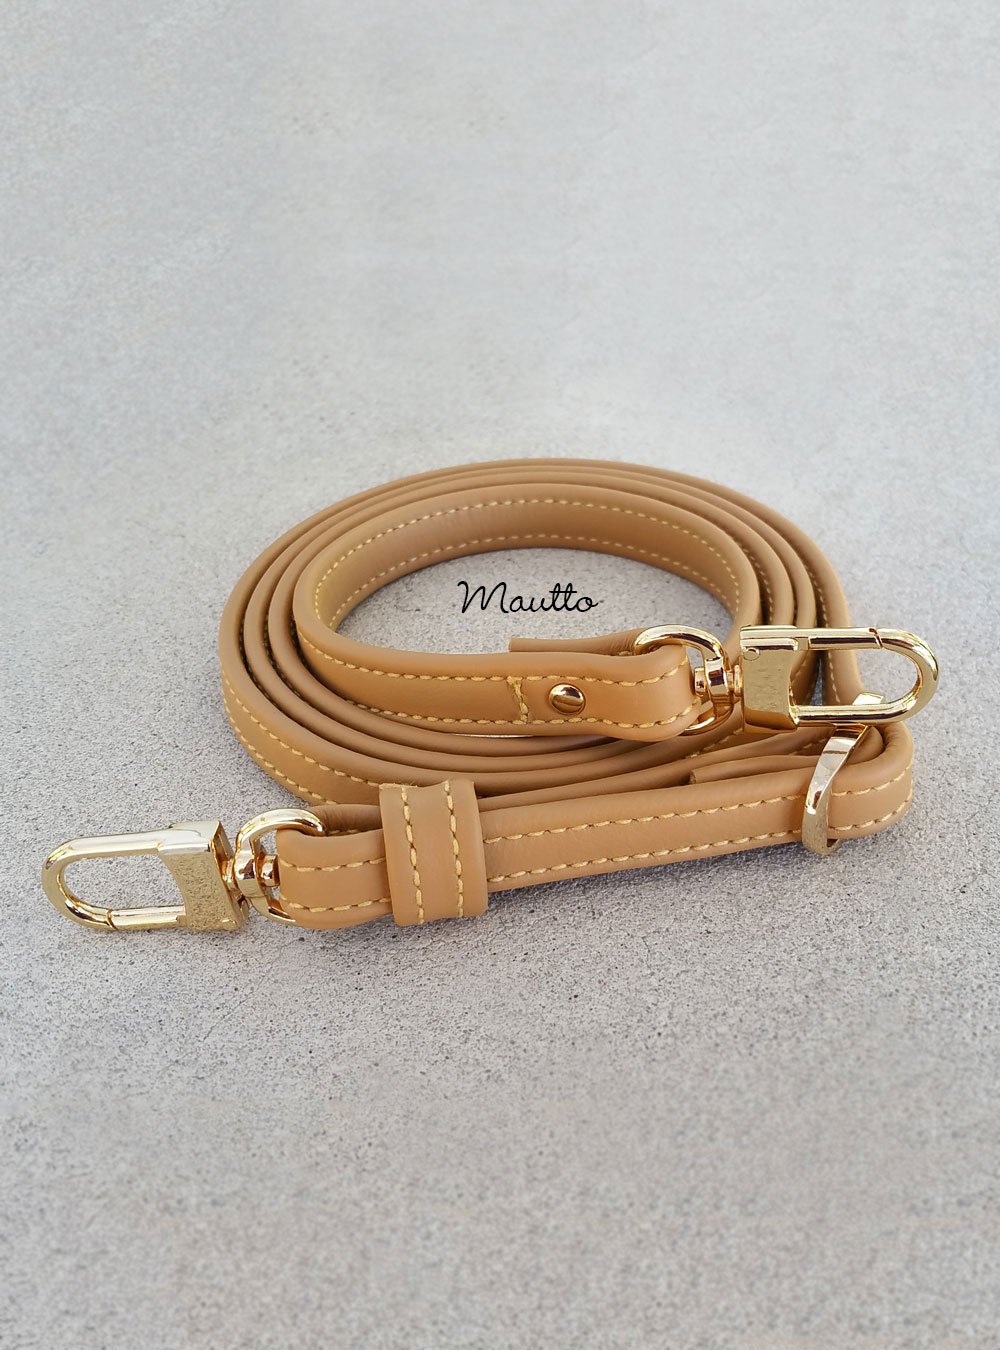 Louis Vuitton Replacement Straps and Repair for LV Bags | Replacement Purse Straps & Handbag Accessories - Leather, Chain & more Mautto